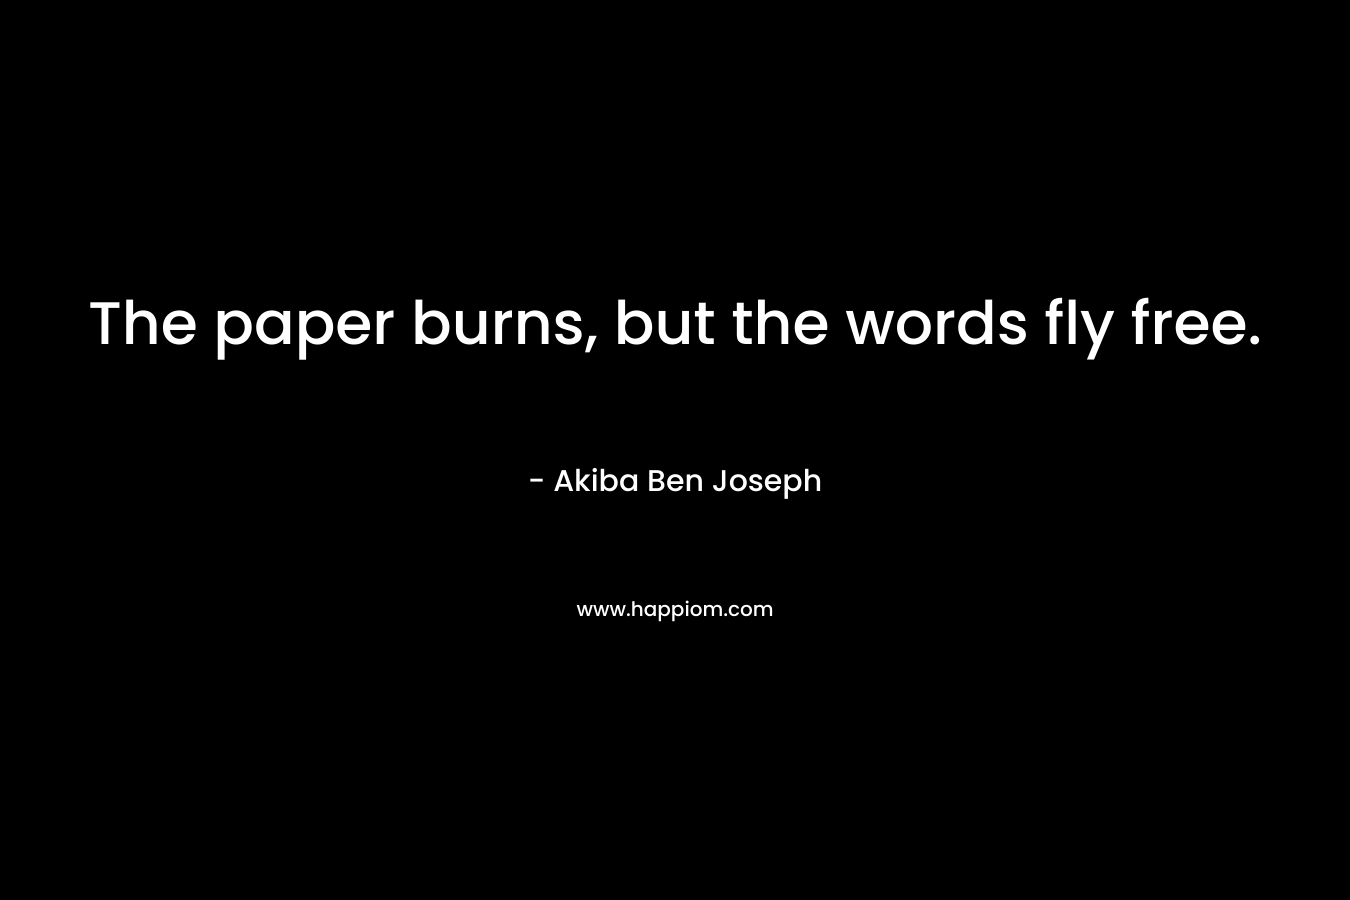 The paper burns, but the words fly free.